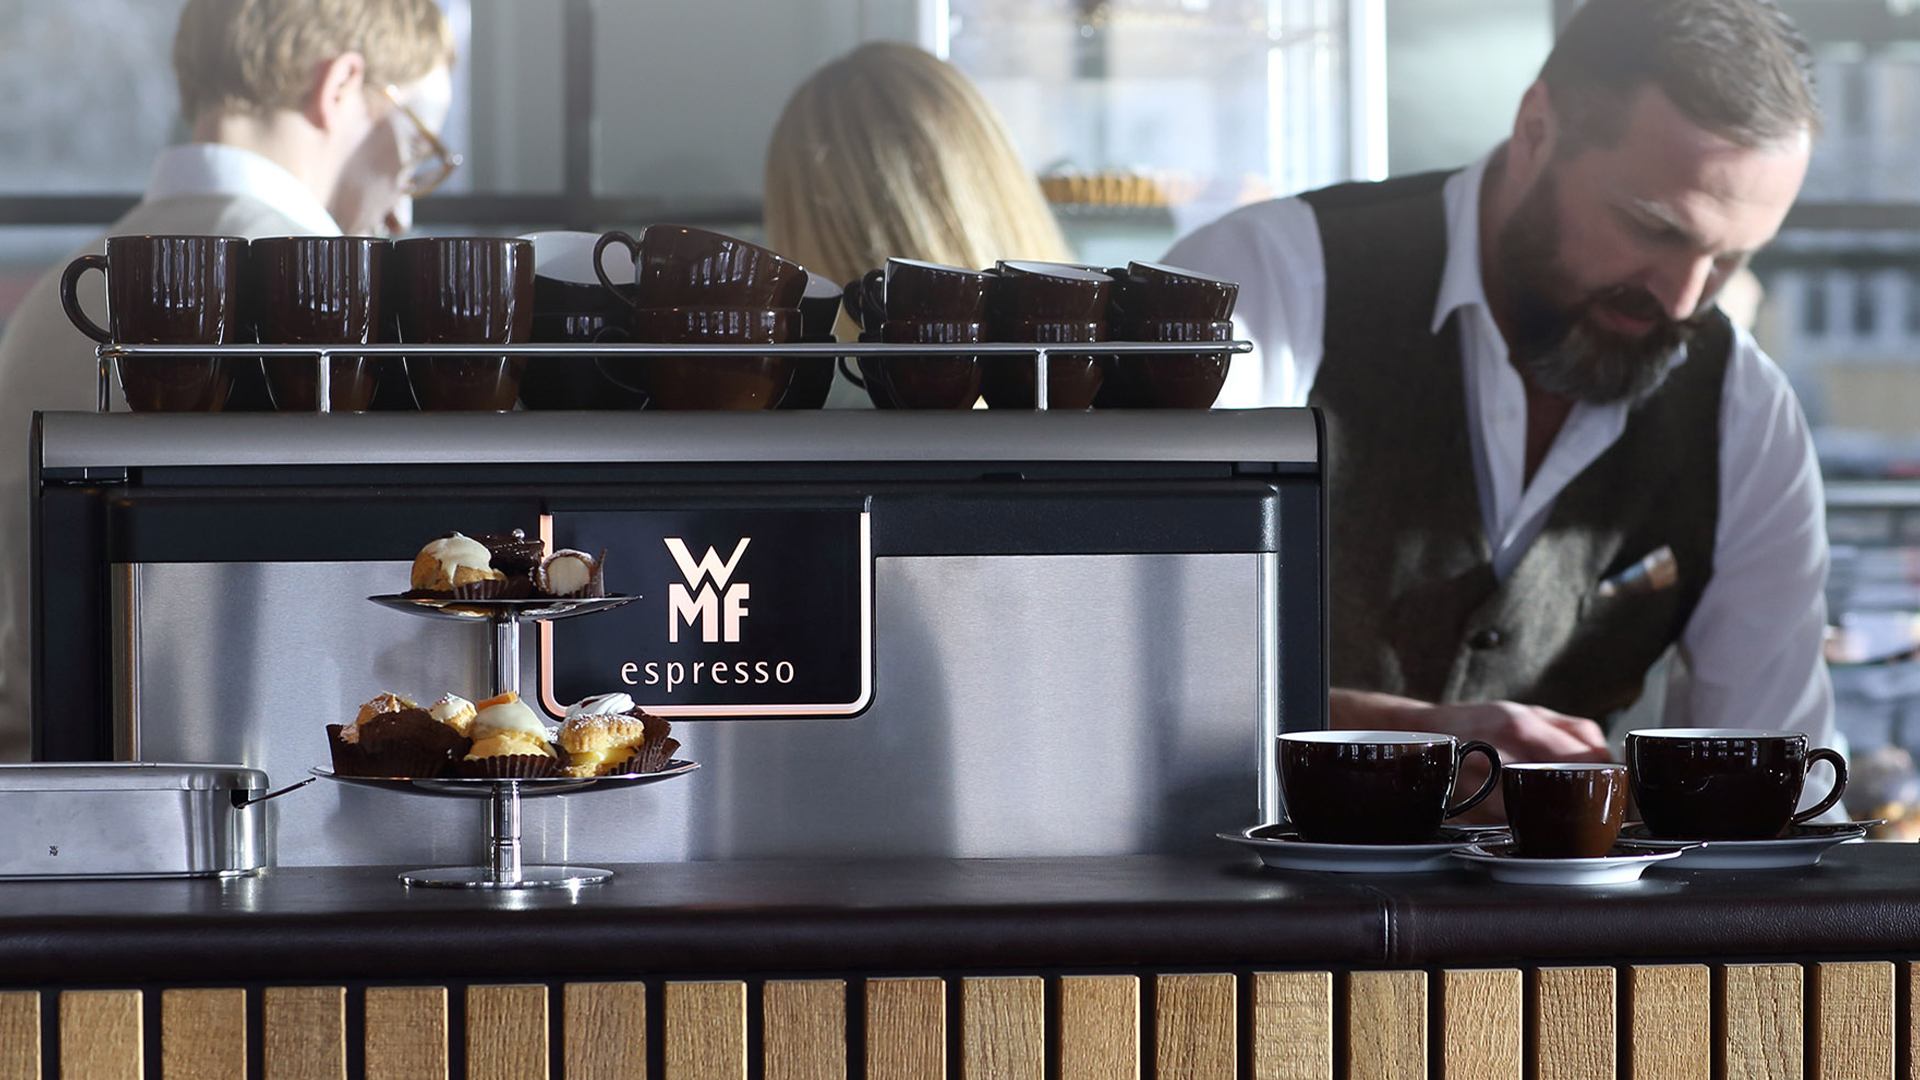 A barista serves coffee prepared with WMF espresso, a semi-automatic machine for gastronomy and catering. The coherent design was created by the design studio designship GmbH from Ulm. red dot award 2015 - best of the best - design award - designship GmbH - product design - industrial design - interface design - iF world design index - Top 25 Industry - Top 100 design studios worldwide - we love design